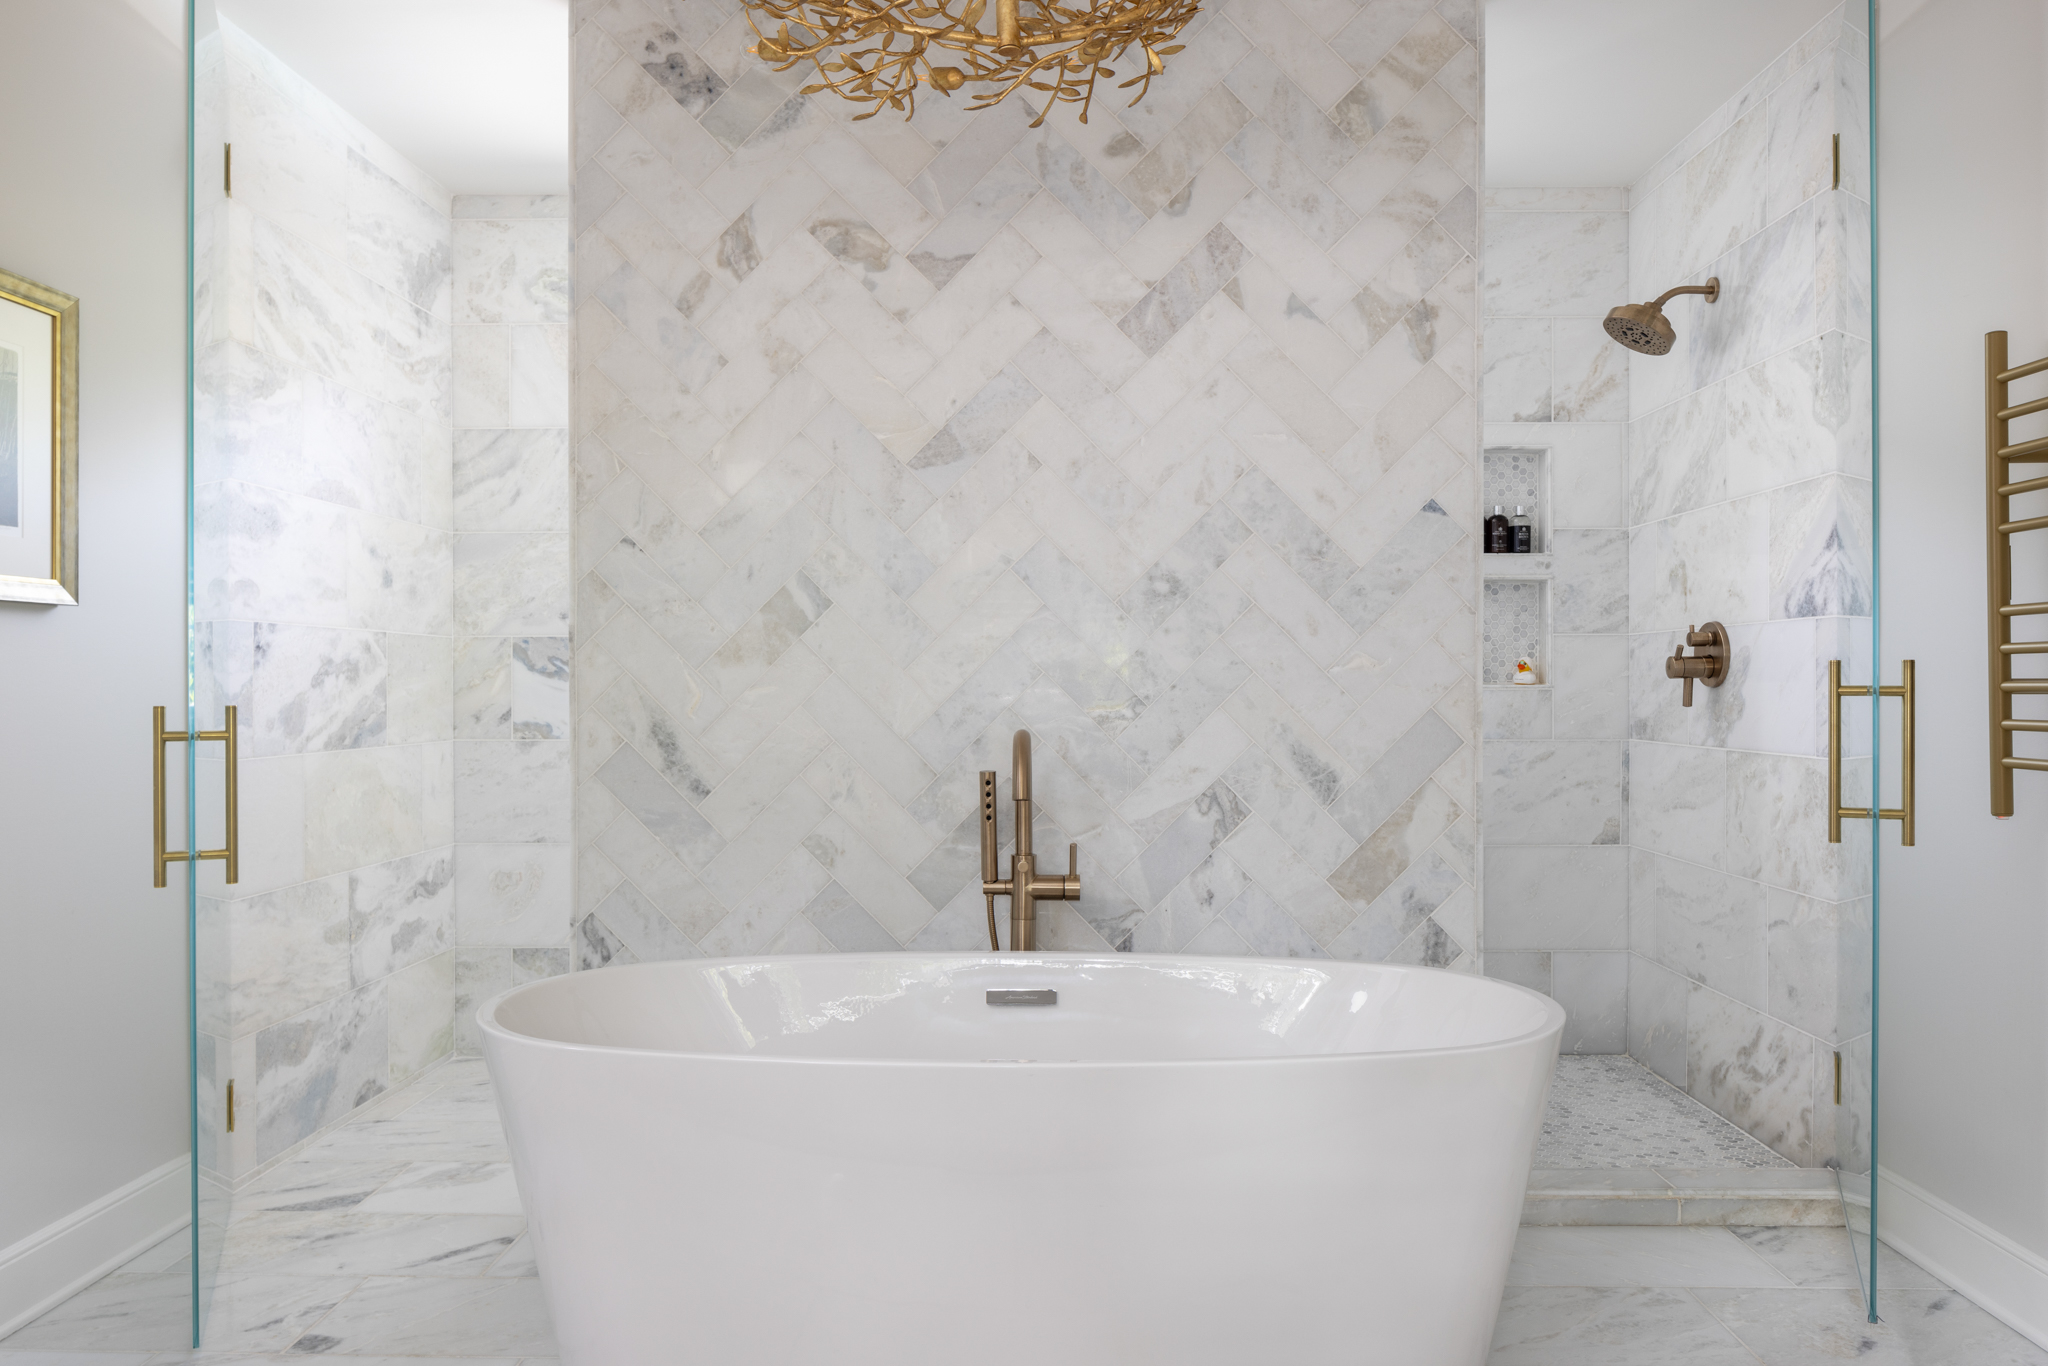  The pièce de resistance, without a doubt, is the master bathroom, a dazzling retreat exuding luxury and elegance, replete with marble flooring and tile paired with gold toned hardware. The herringbone pattern for the marble wall behind the tub is quite eye-catching!